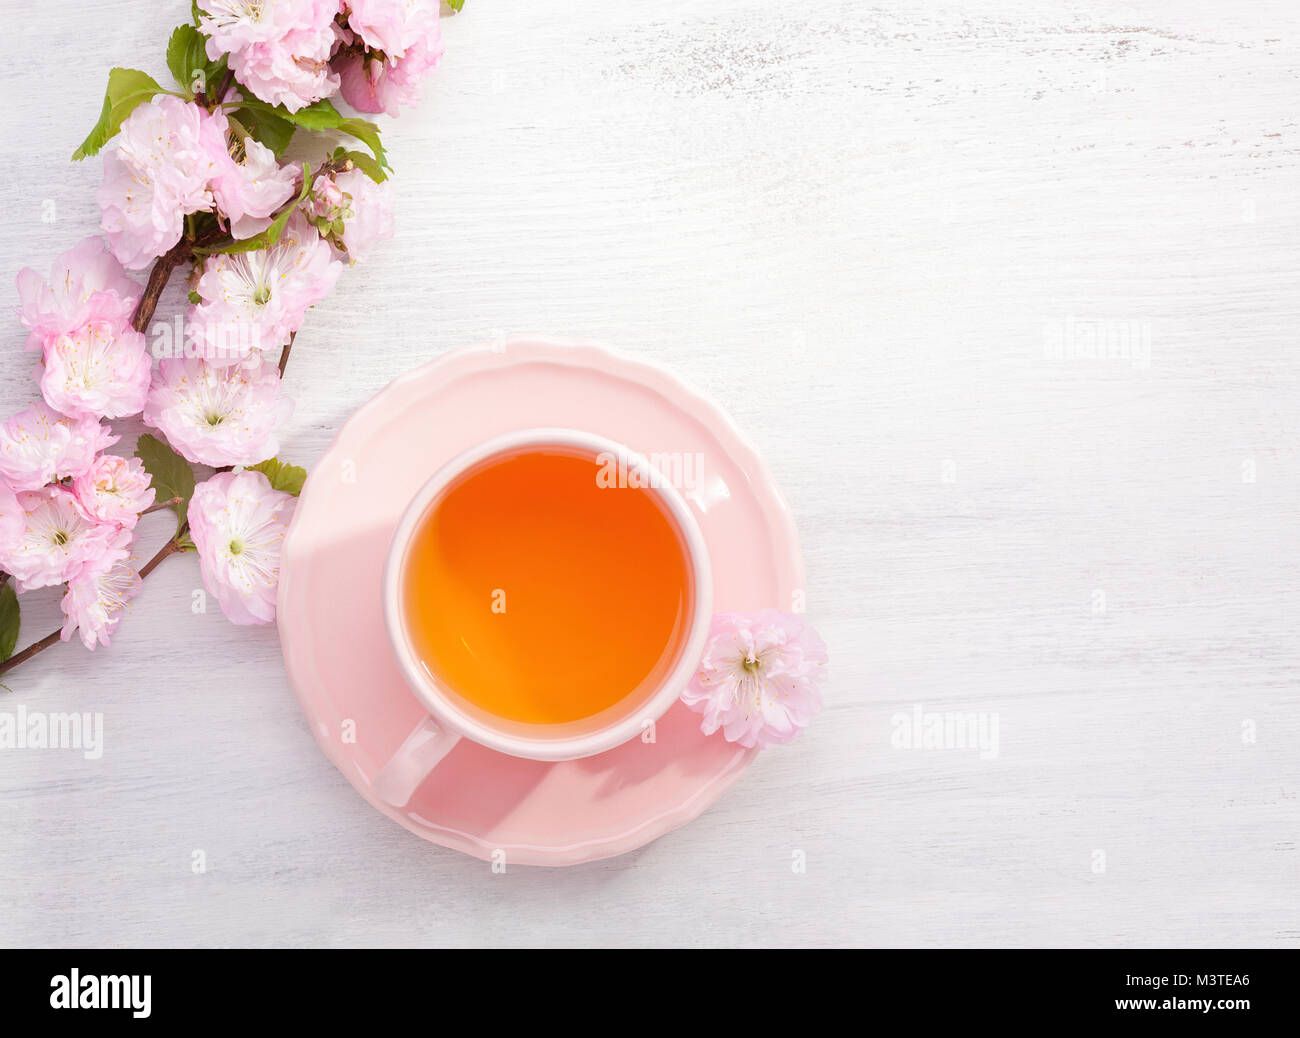 Cup of tea and  blossoming Almond (Prunus triloba) branch  on rustic table. Stock Photo